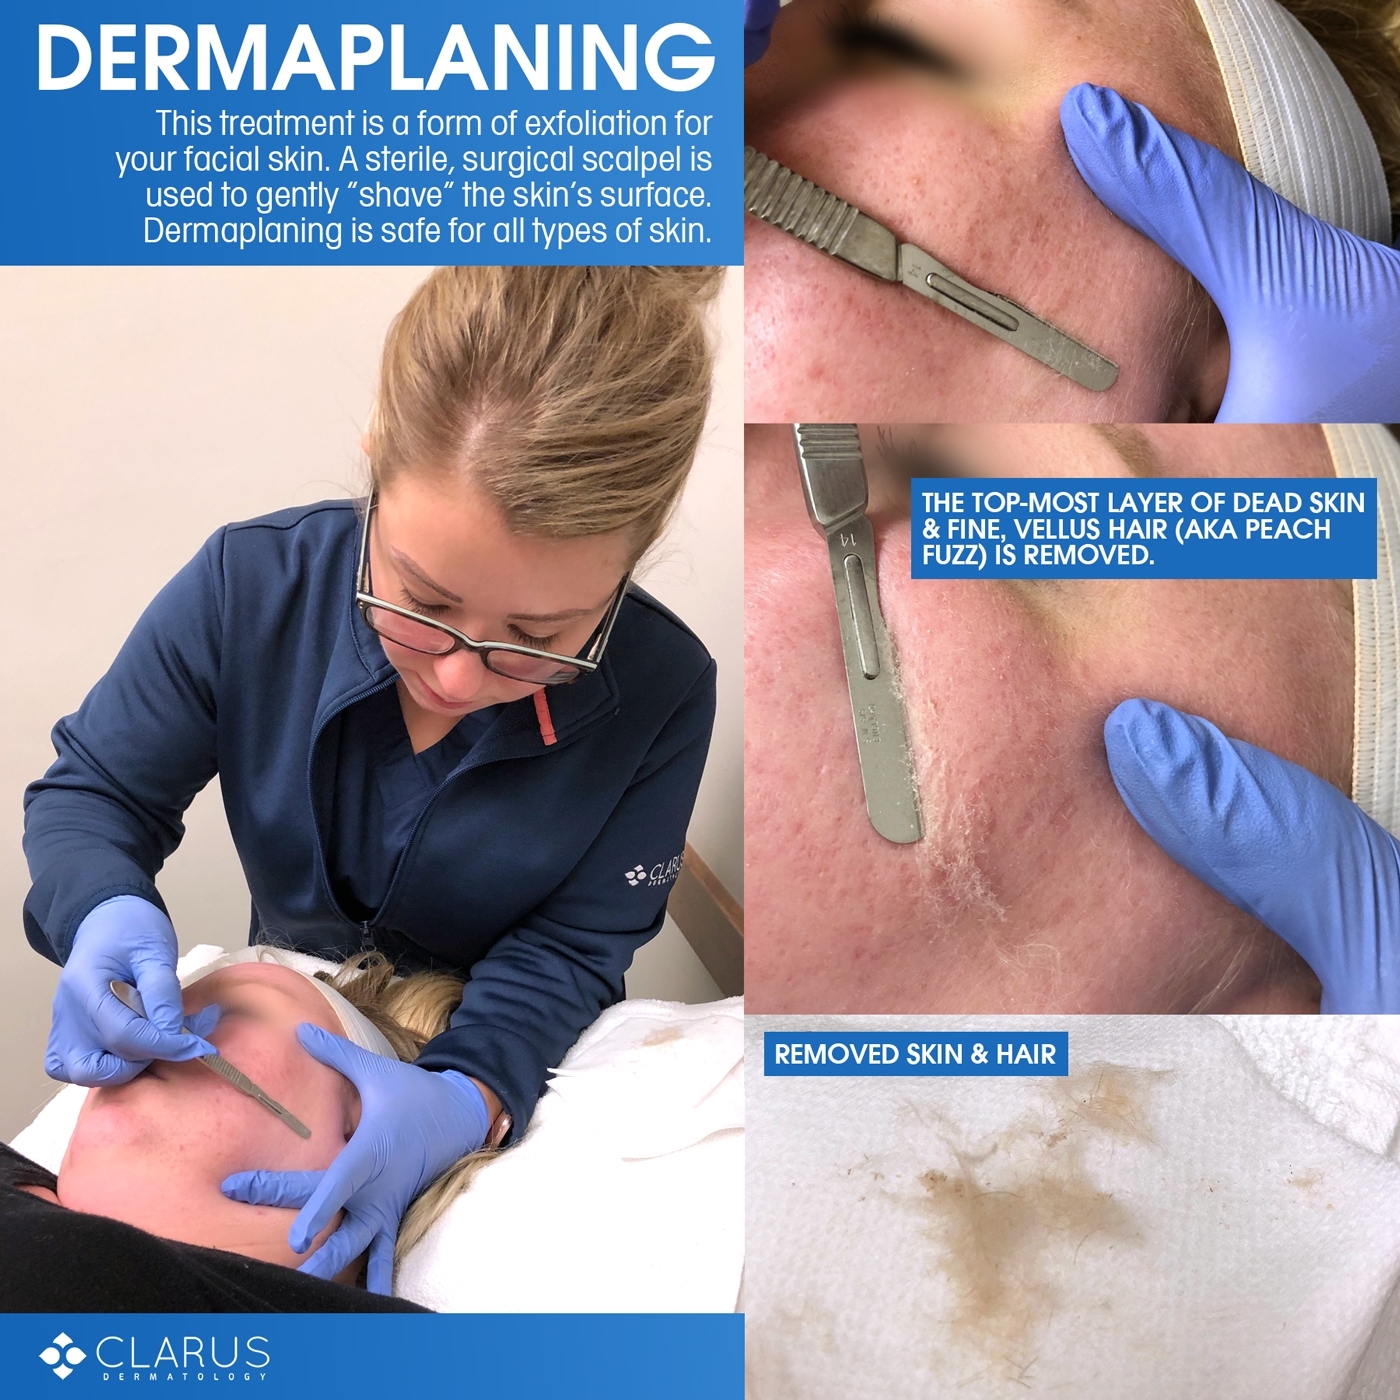 Clarus Dermatology is offering a new way to exfoliate your facial skin. Our Skin Technician April is now performing a treatment called dermaplaning, which involves gently “shaving” the top-most layer of dead skin and fine, vellus hair (aka peach fuzz) off of the face.